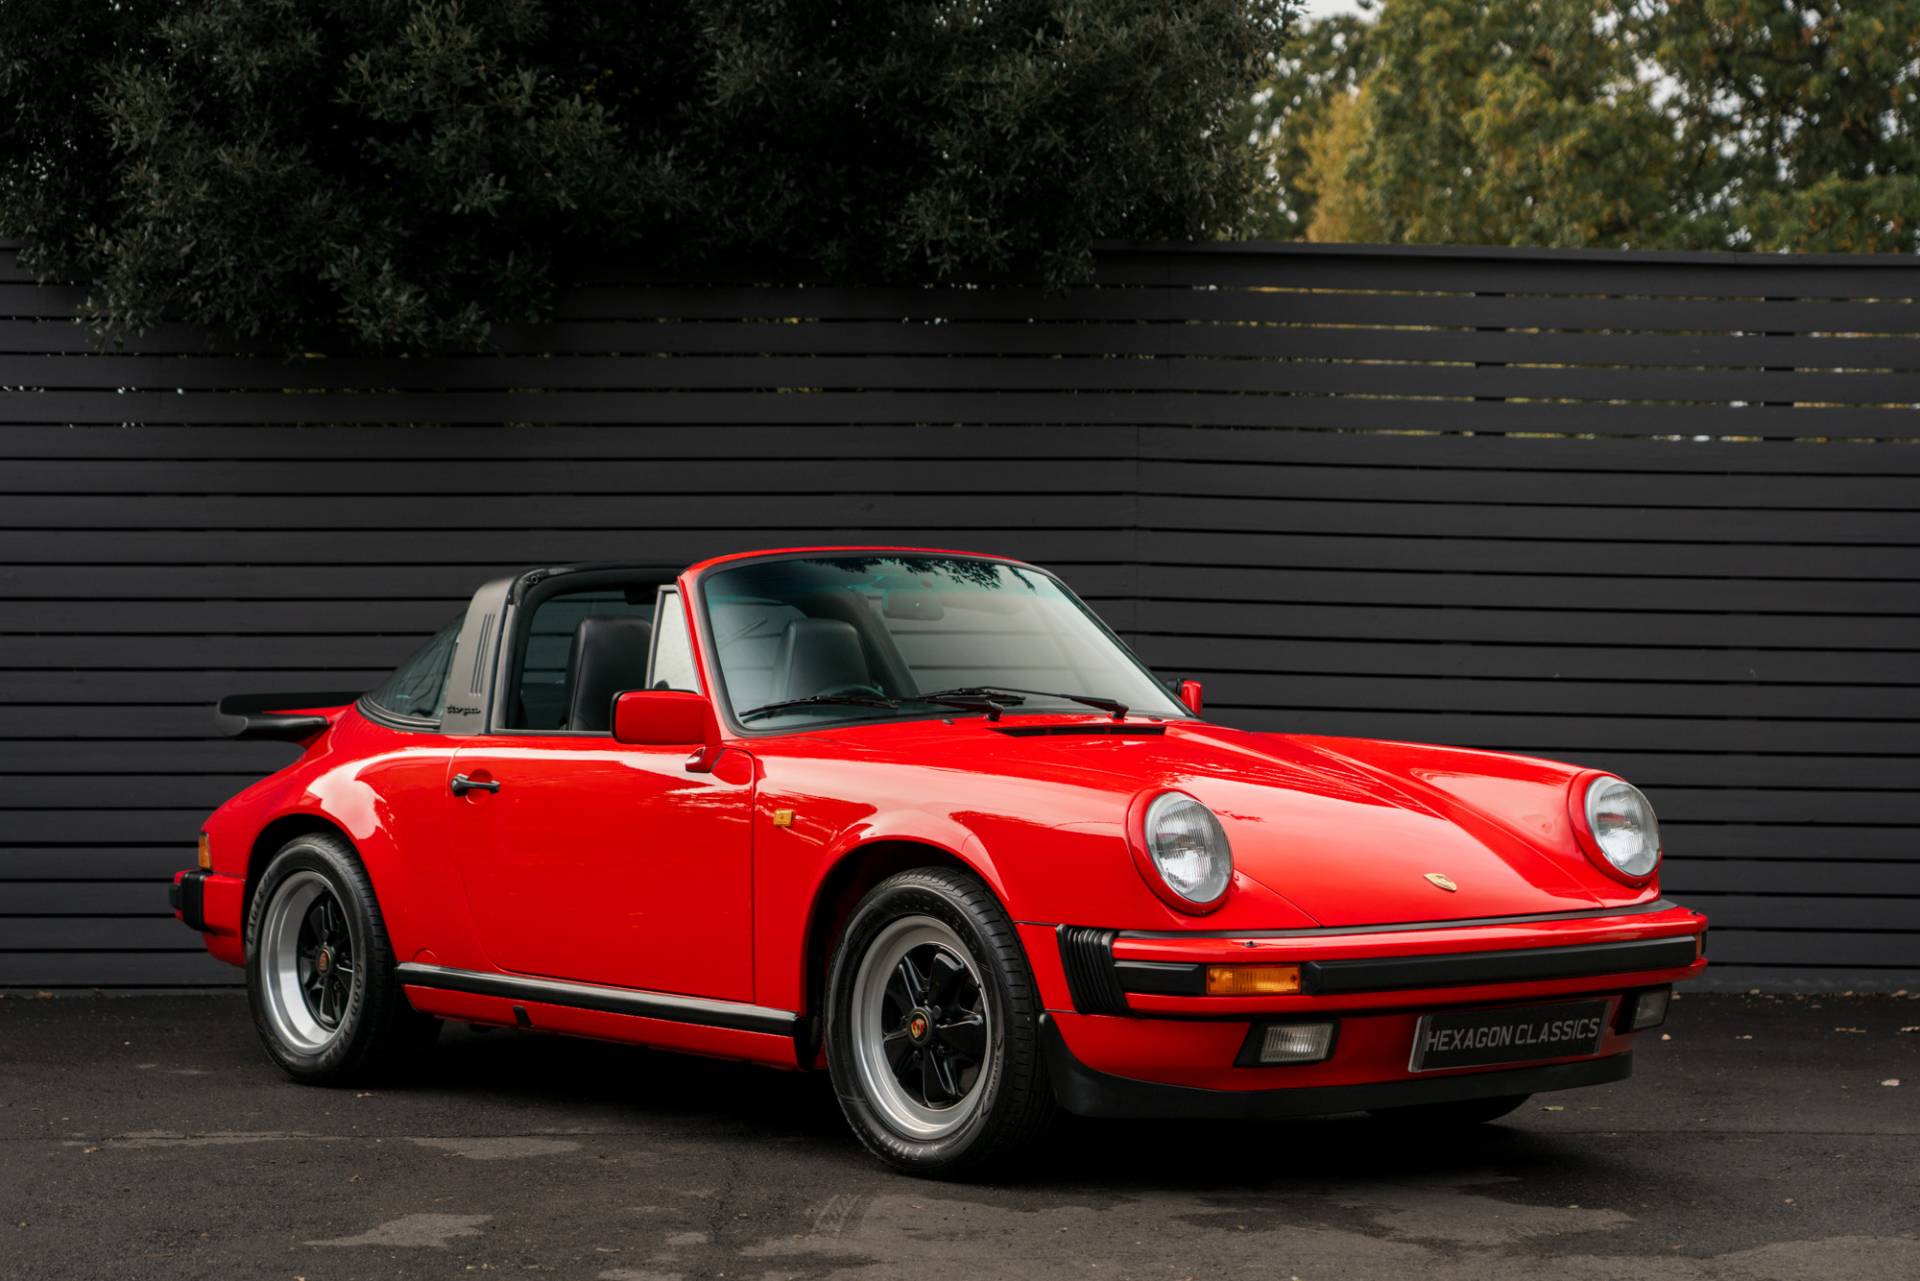 For Sale: Porsche 911 Carrera  (1989) offered for GBP 89,995